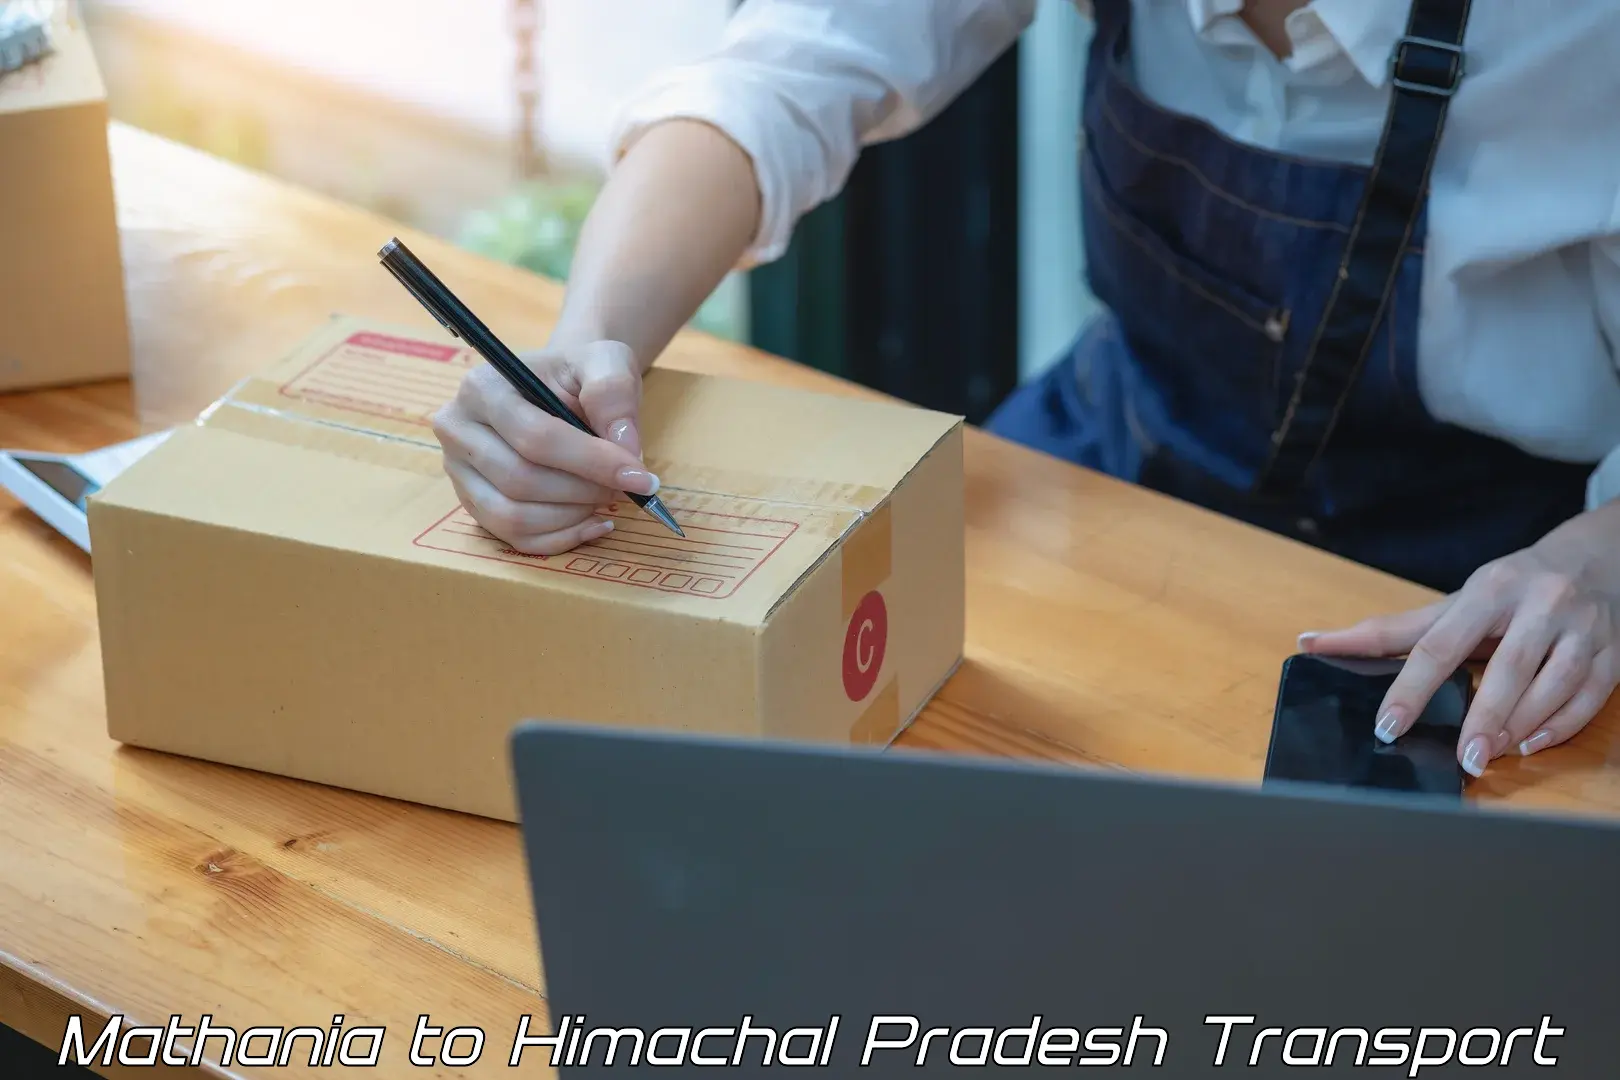 Daily parcel service transport Mathania to Himachal Pradesh